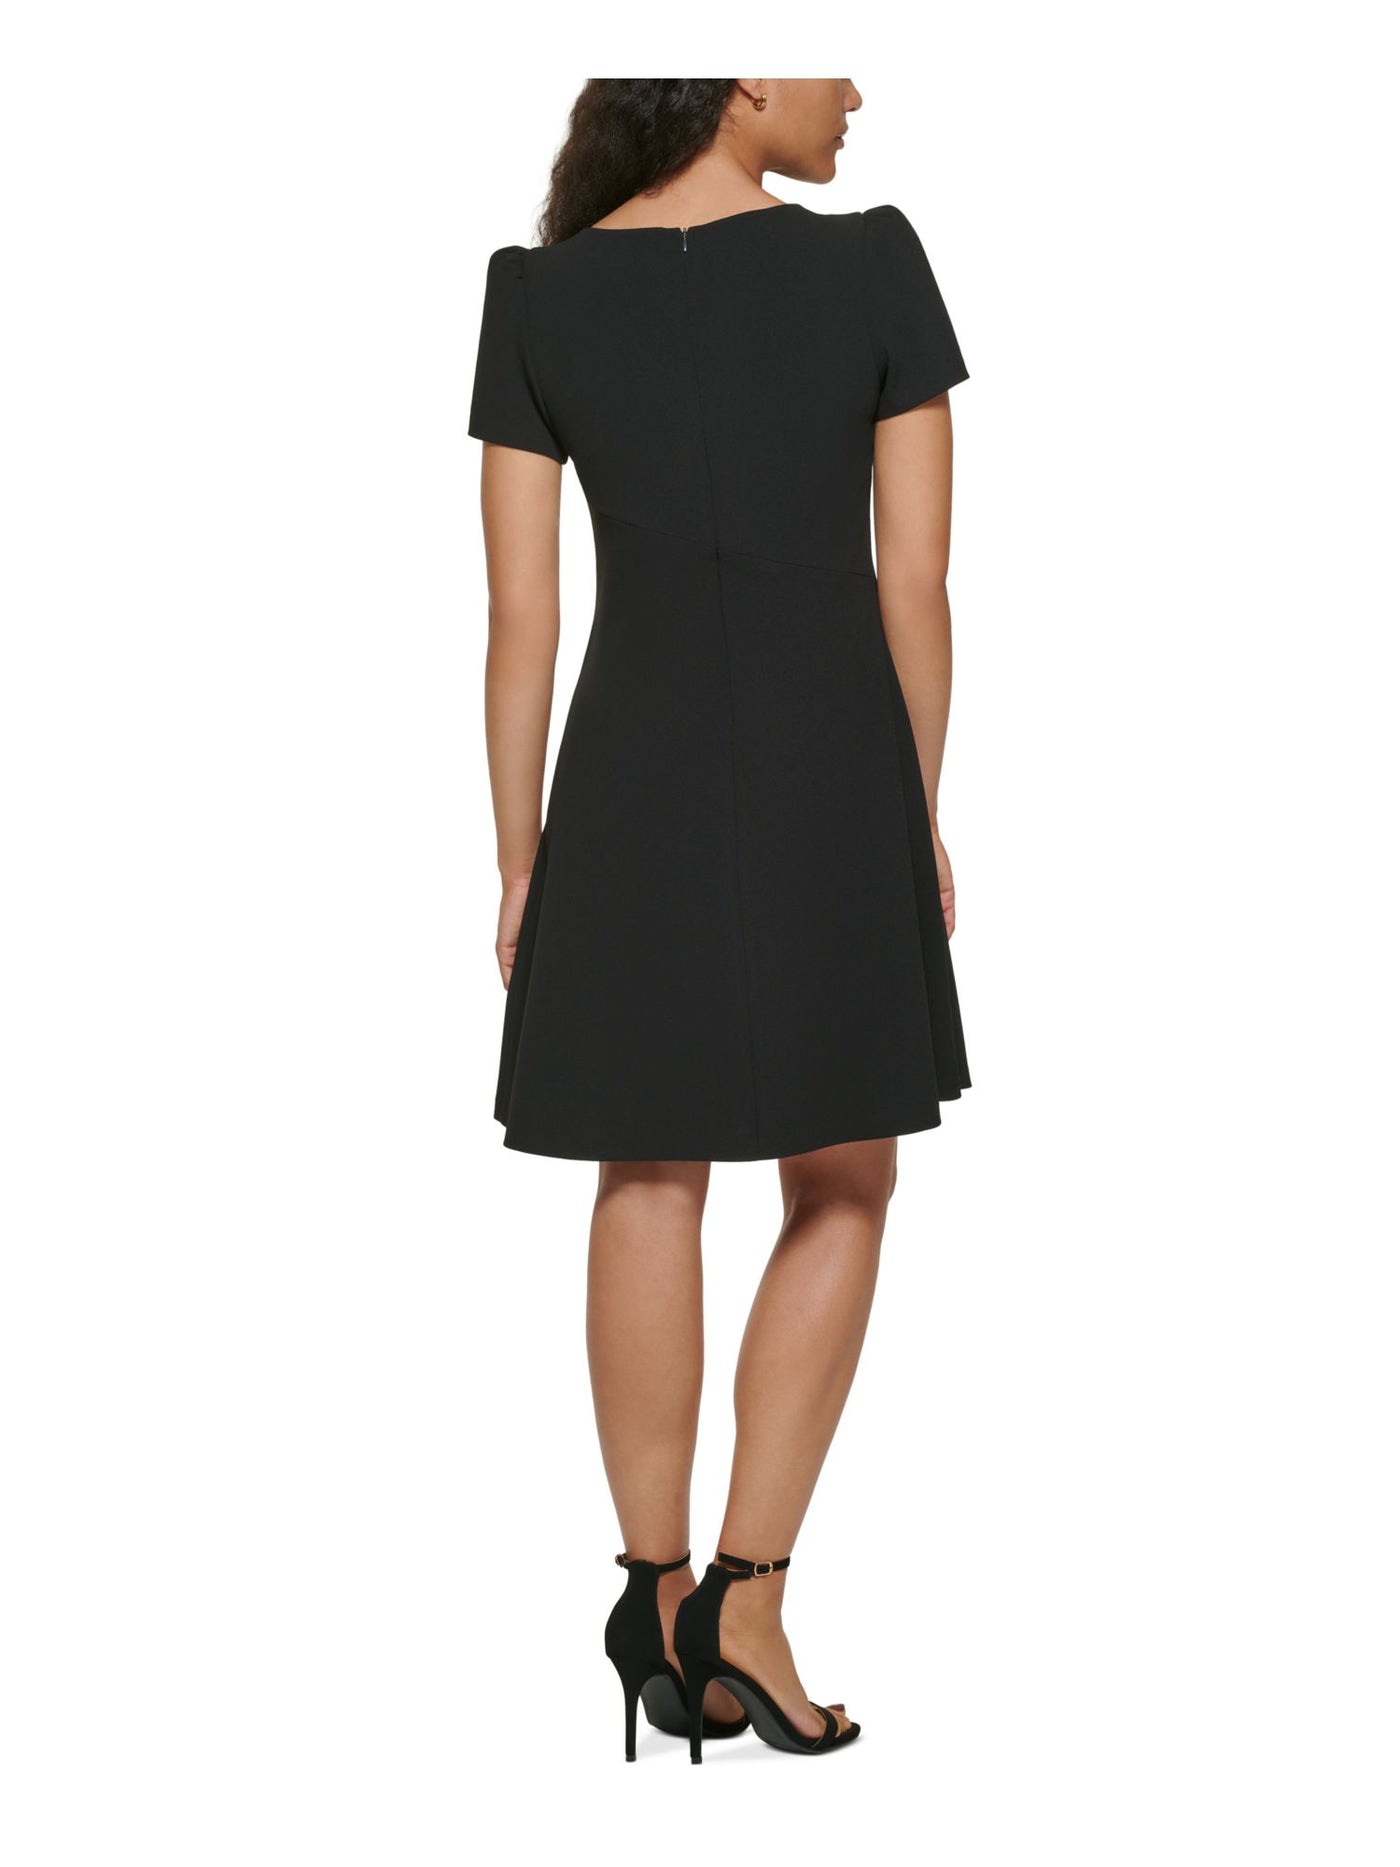 DKNY Womens Black Cut Out Zippered Unlined Asymmetrical Short Sleeve Round Neck Above The Knee Fit + Flare Dress Petites 2P